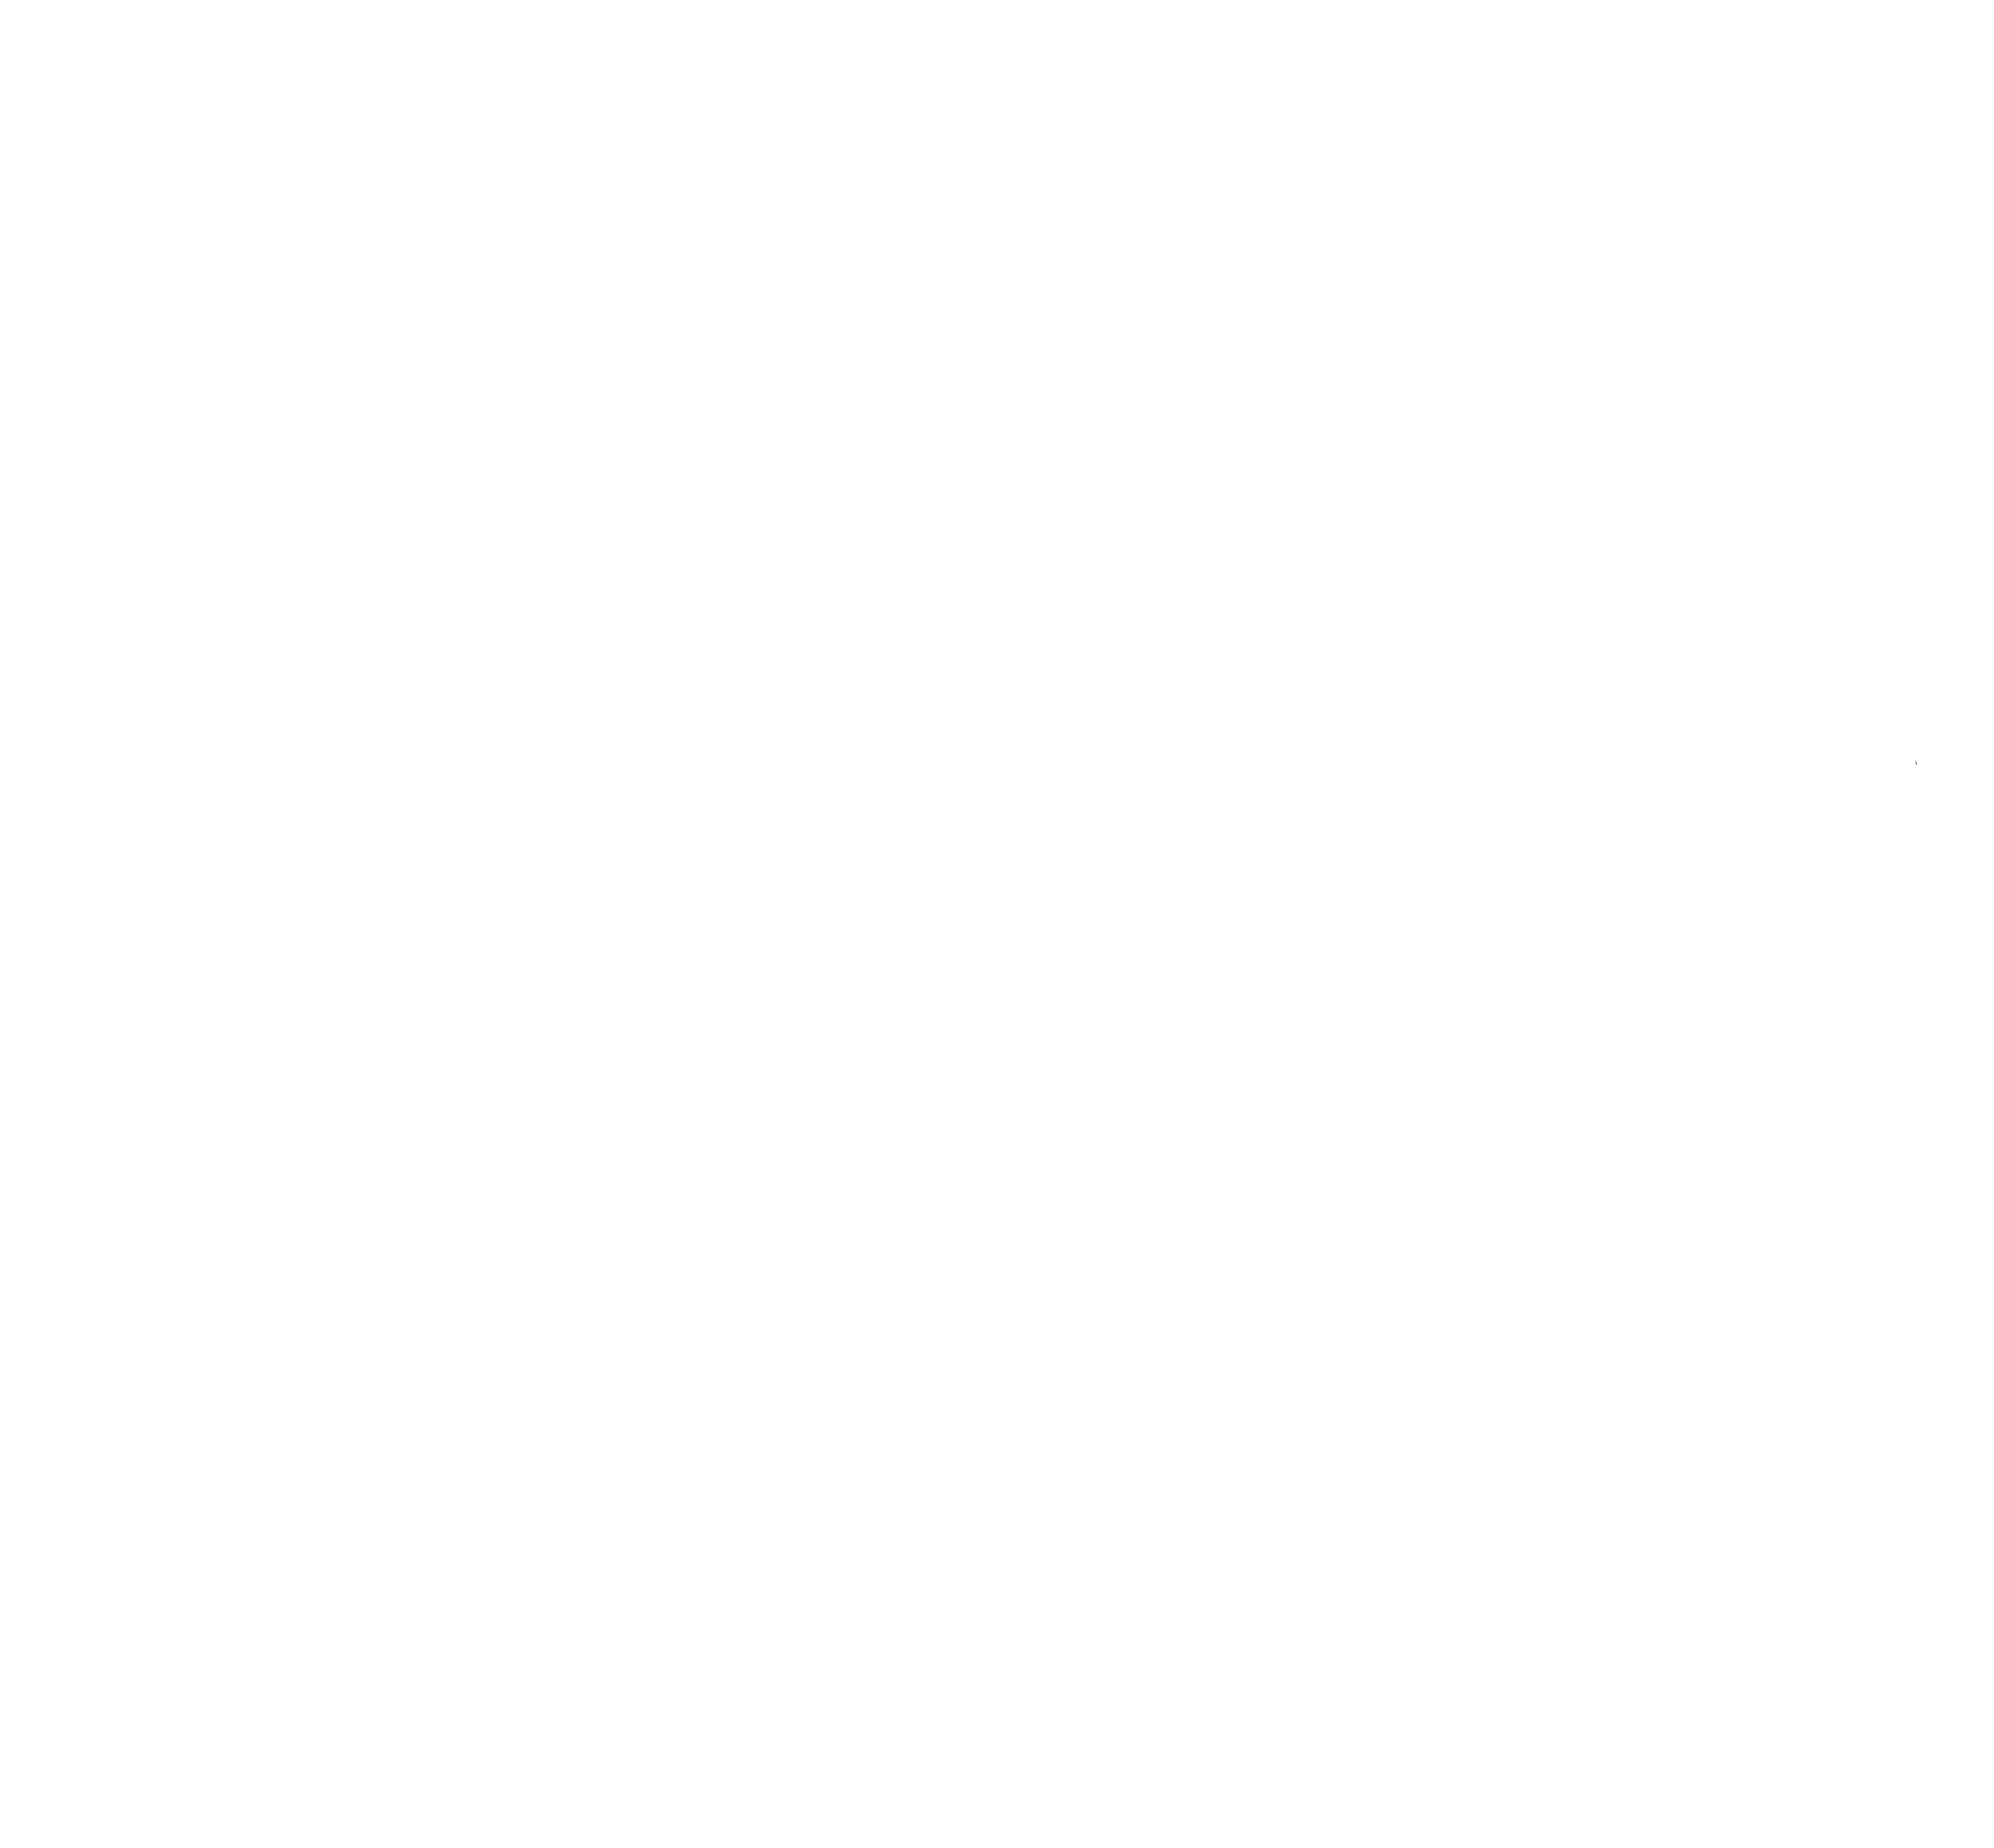 The Emms